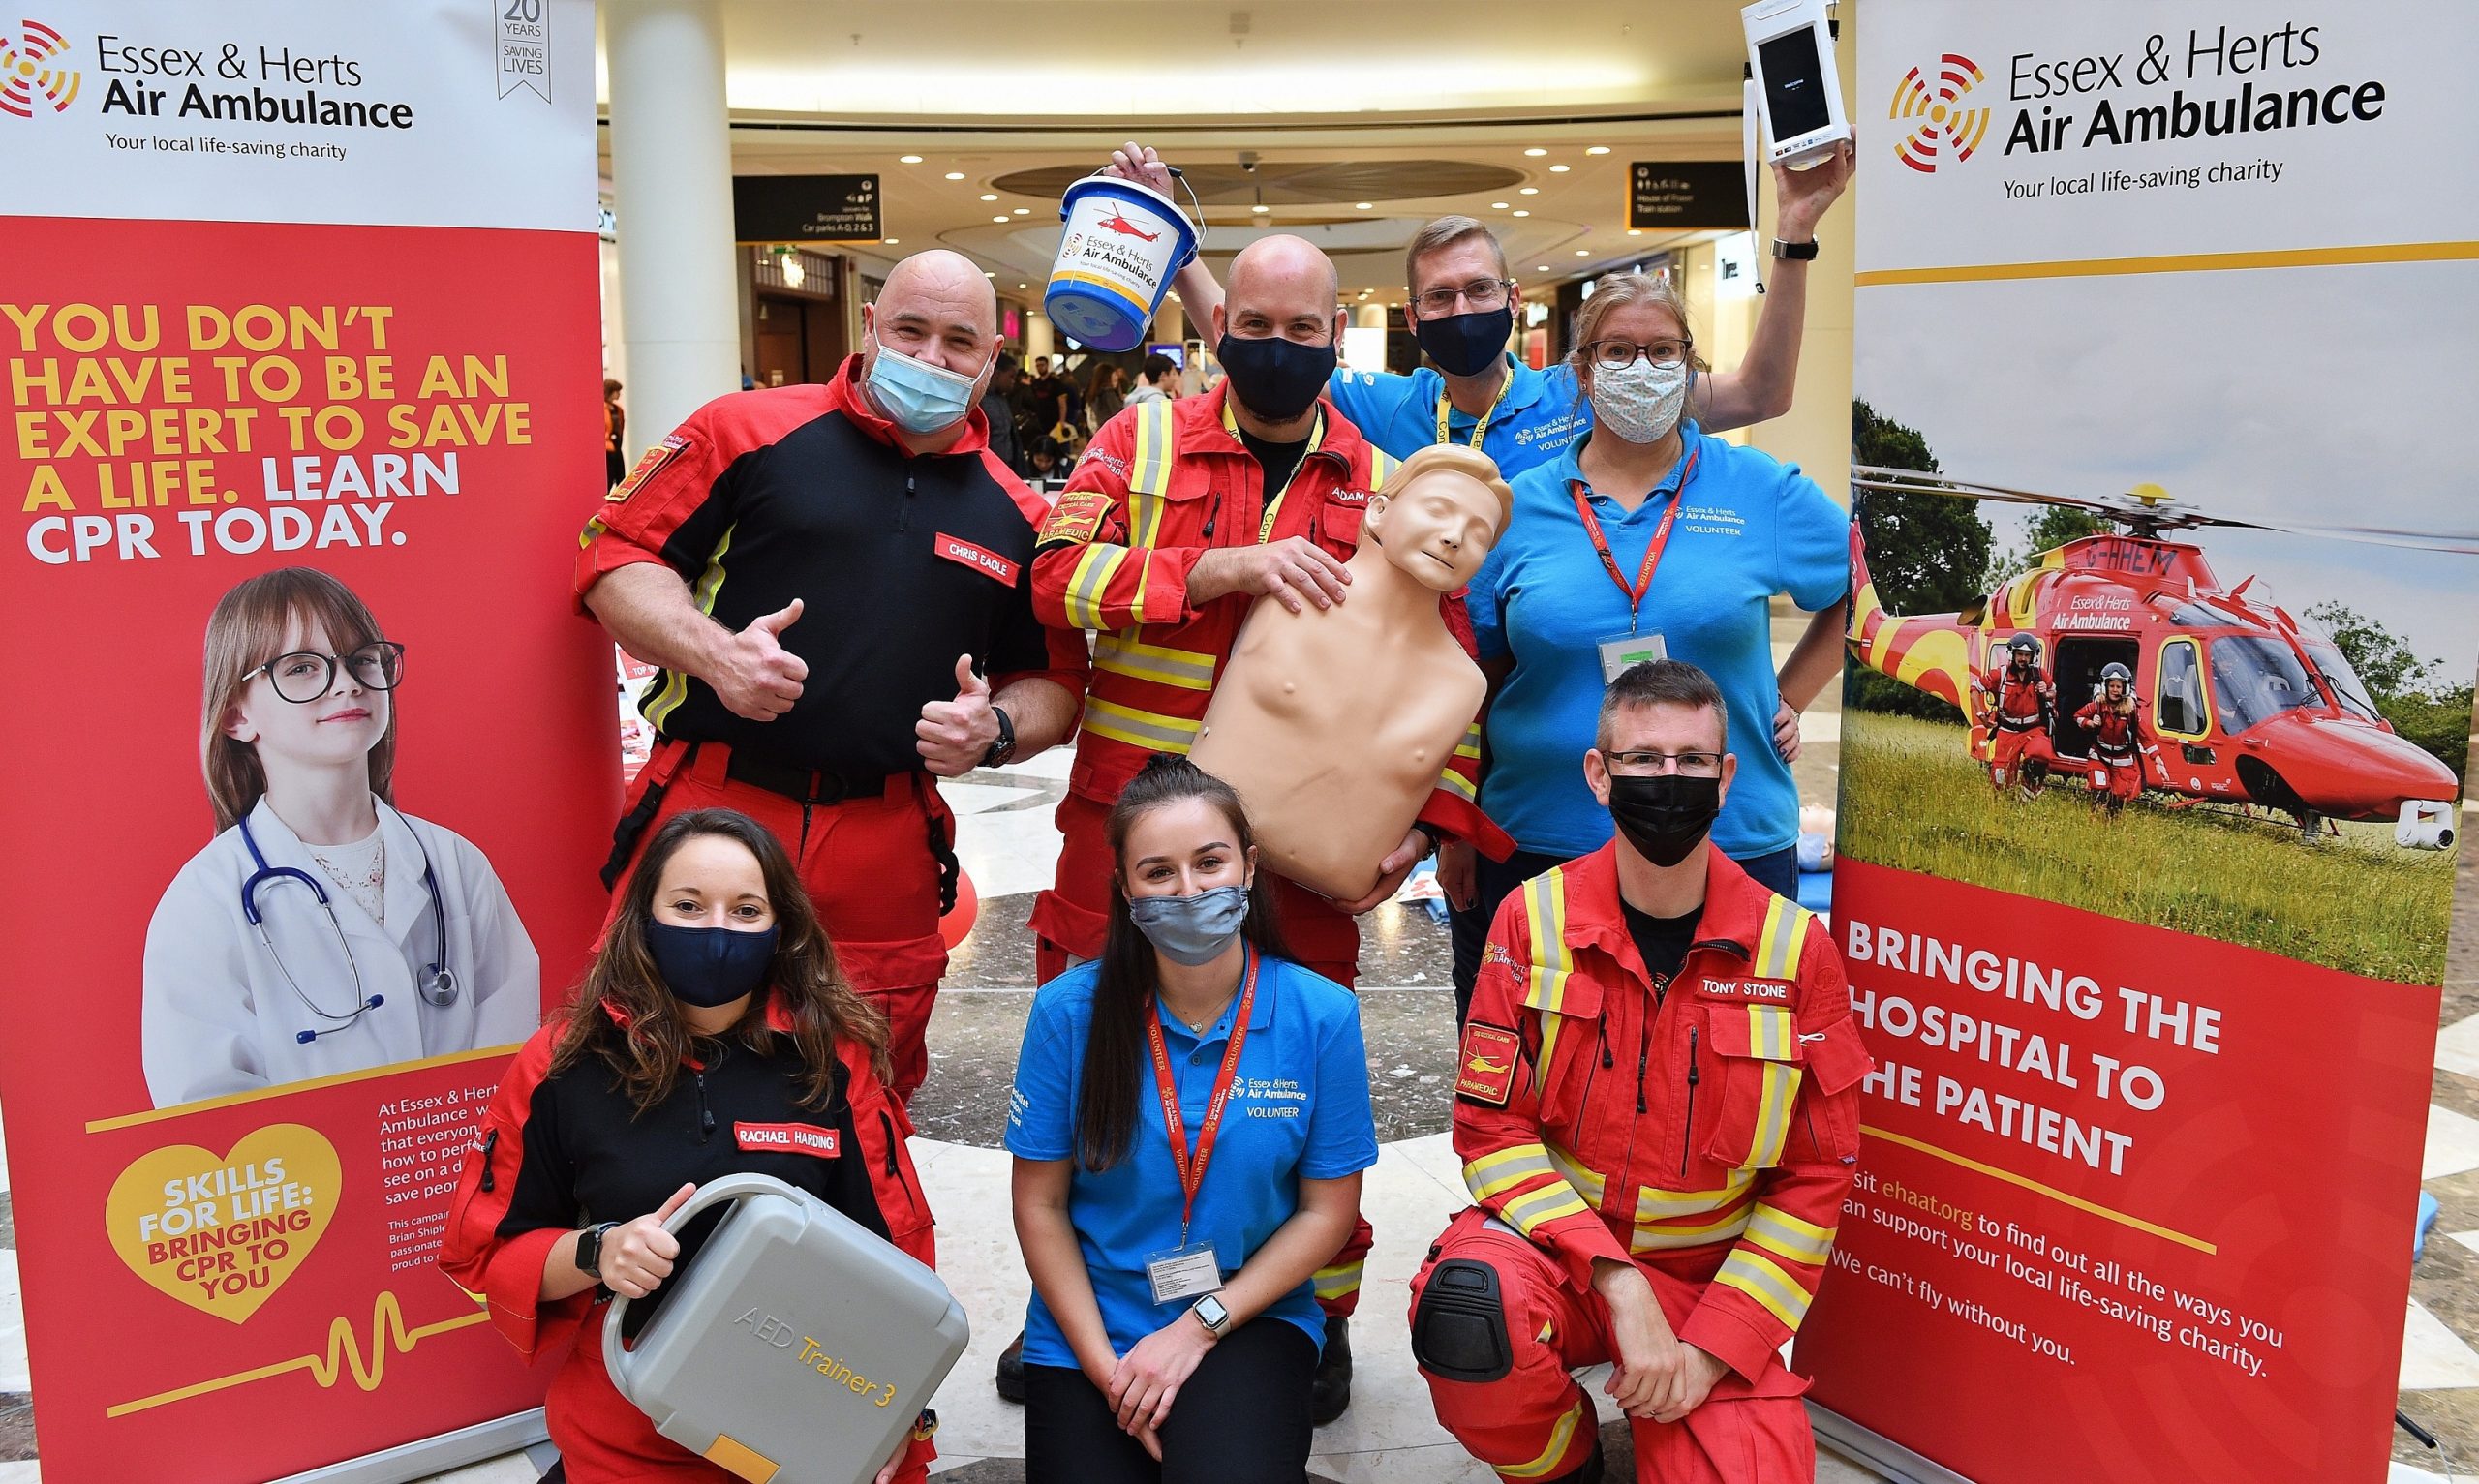 Local air ambulance delivers free CPR and defibrillation training to over 300 members of the public